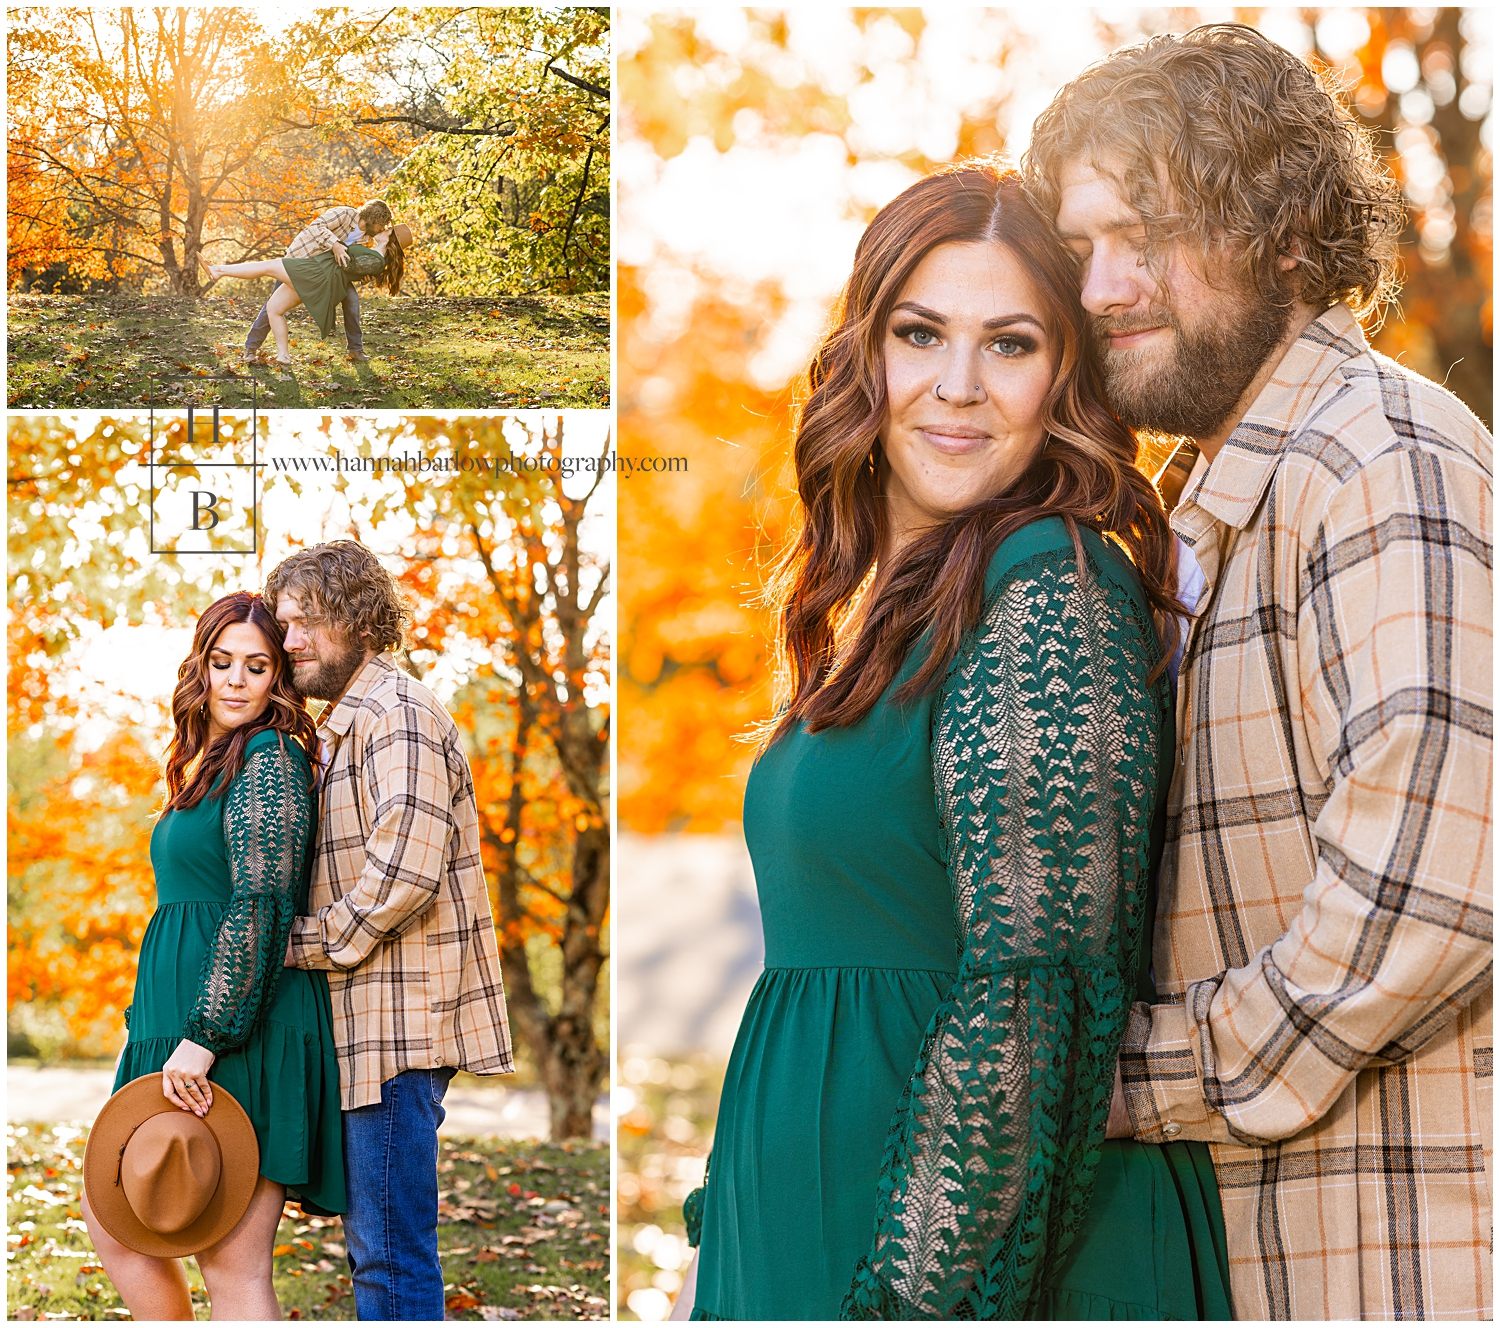 Man snuggles women in green dress for engagement photos.